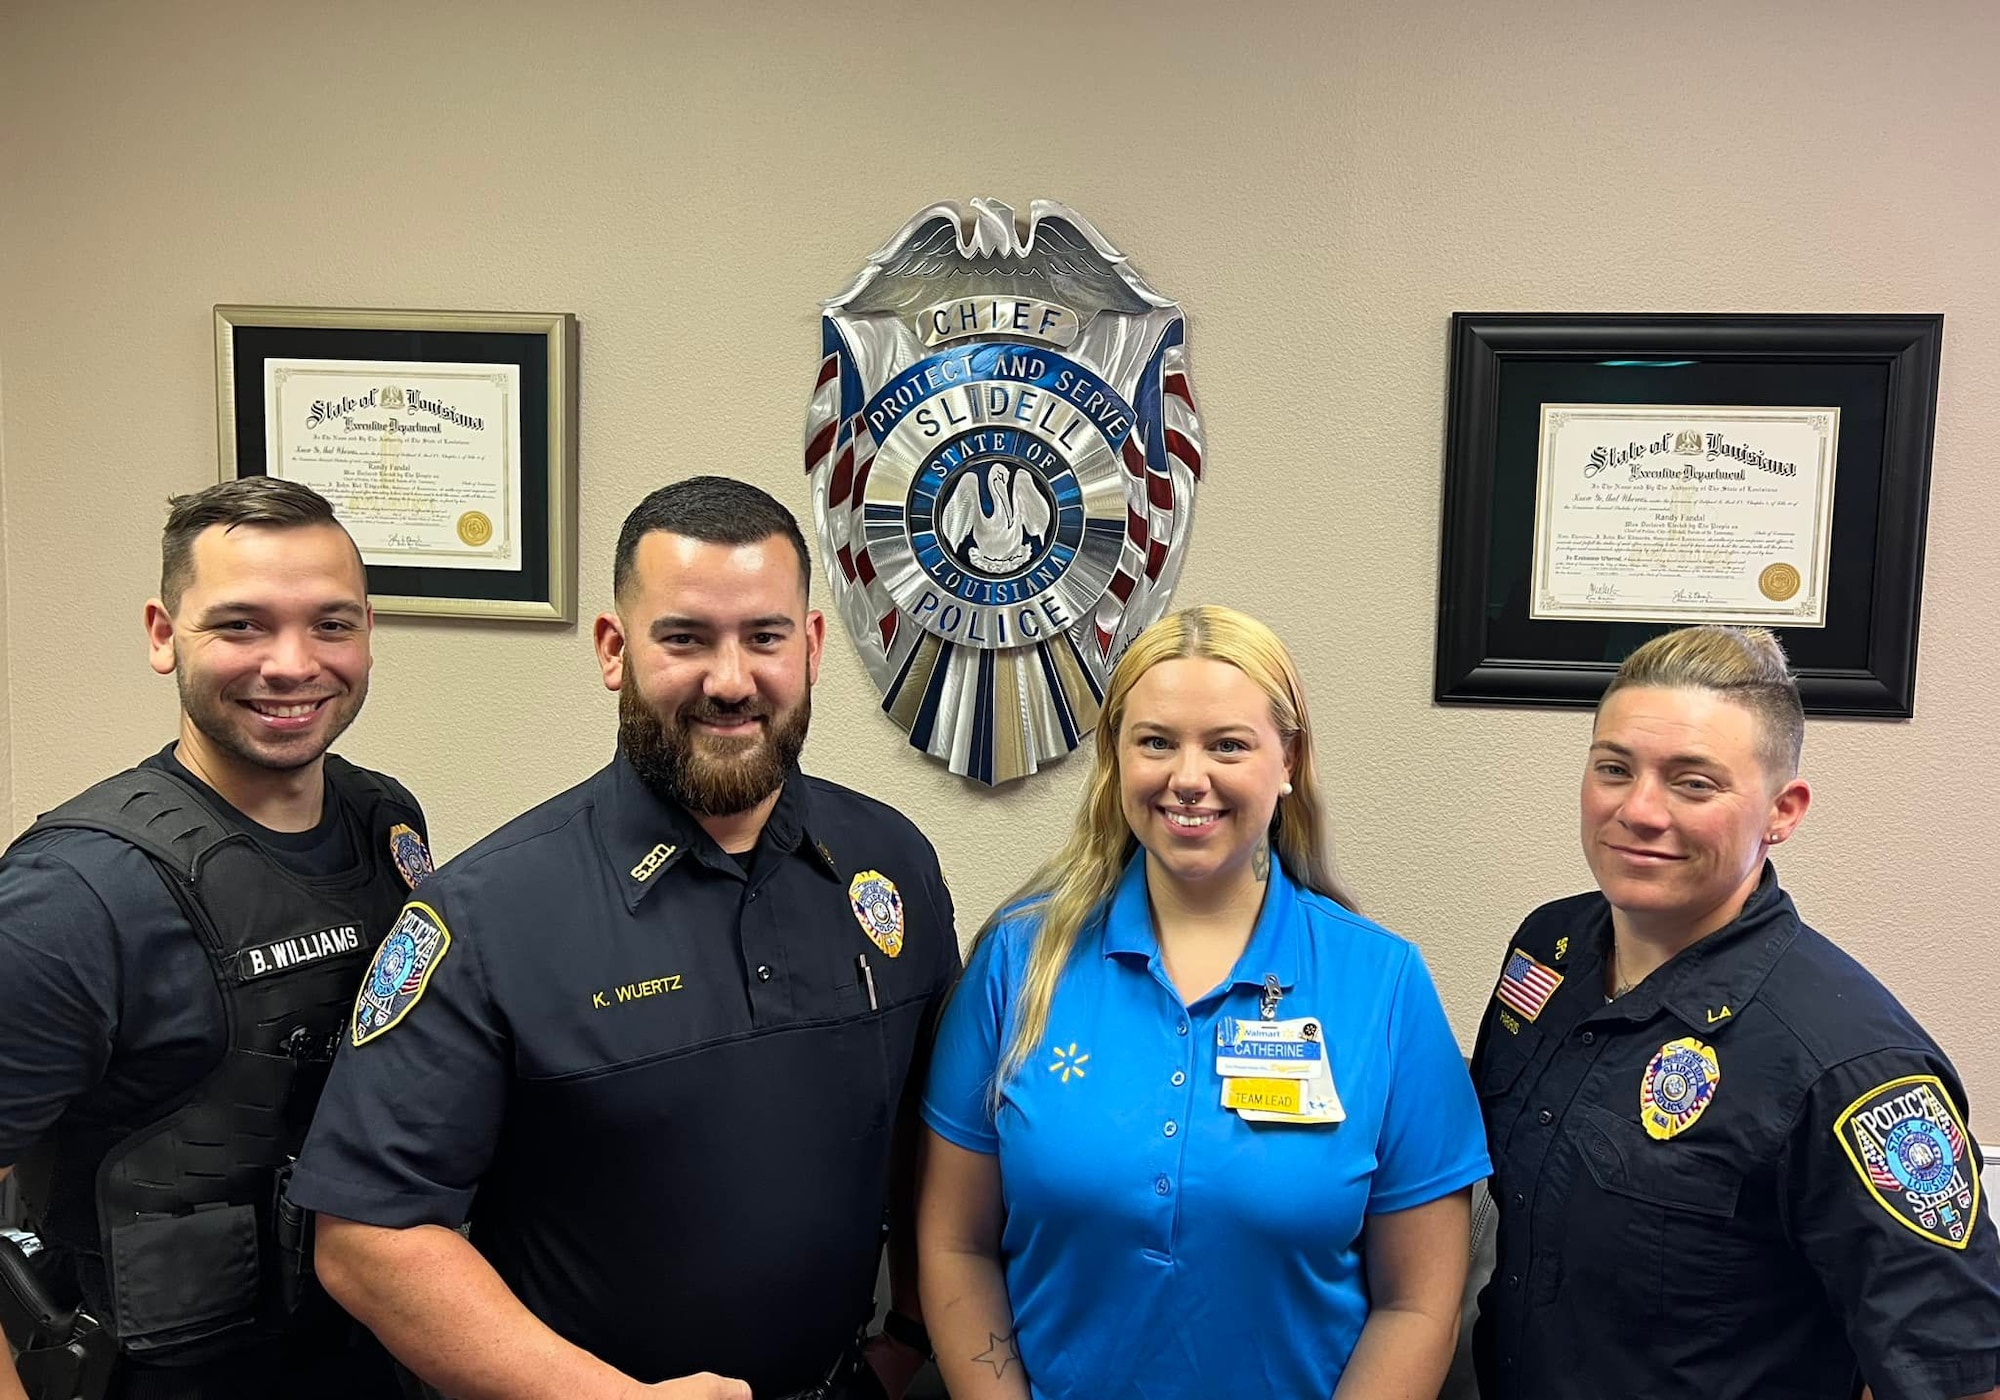 Three police officers flank a Walmart employee